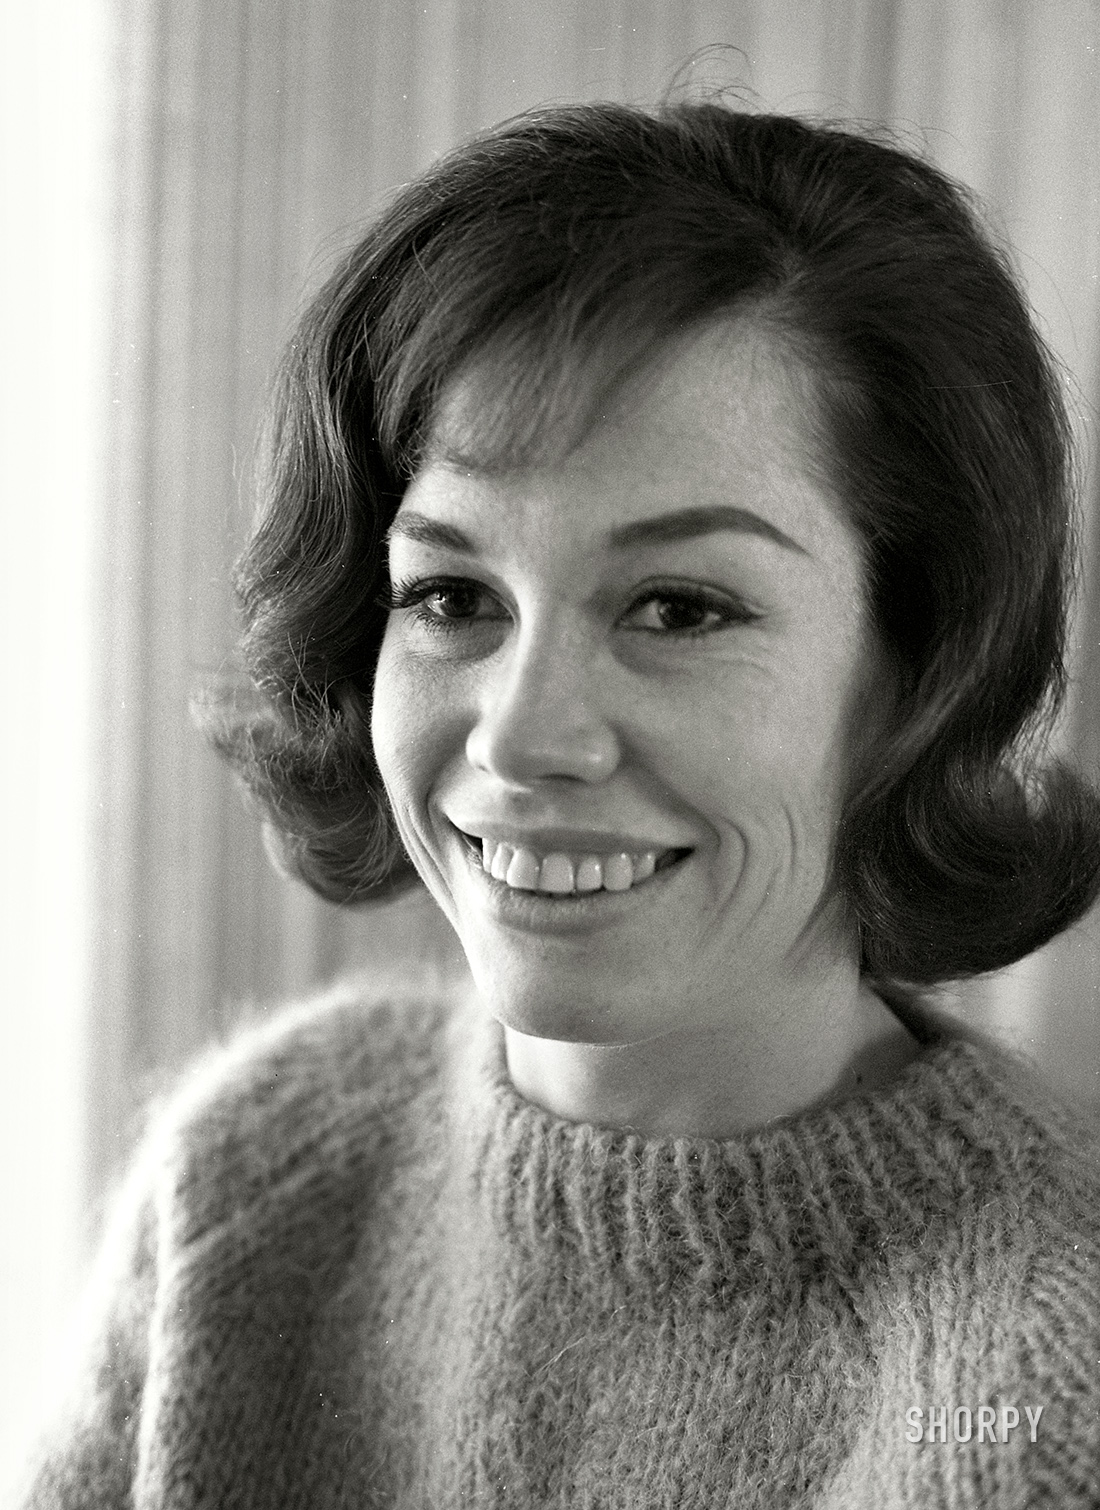 December 1963. "Actress Mary Tyler Moore relaxing at her home in Los Angeles." 35mm negative from photos by Earl Theisen for the Look magazine assignment "America's Favorite TV Wife." View full size.